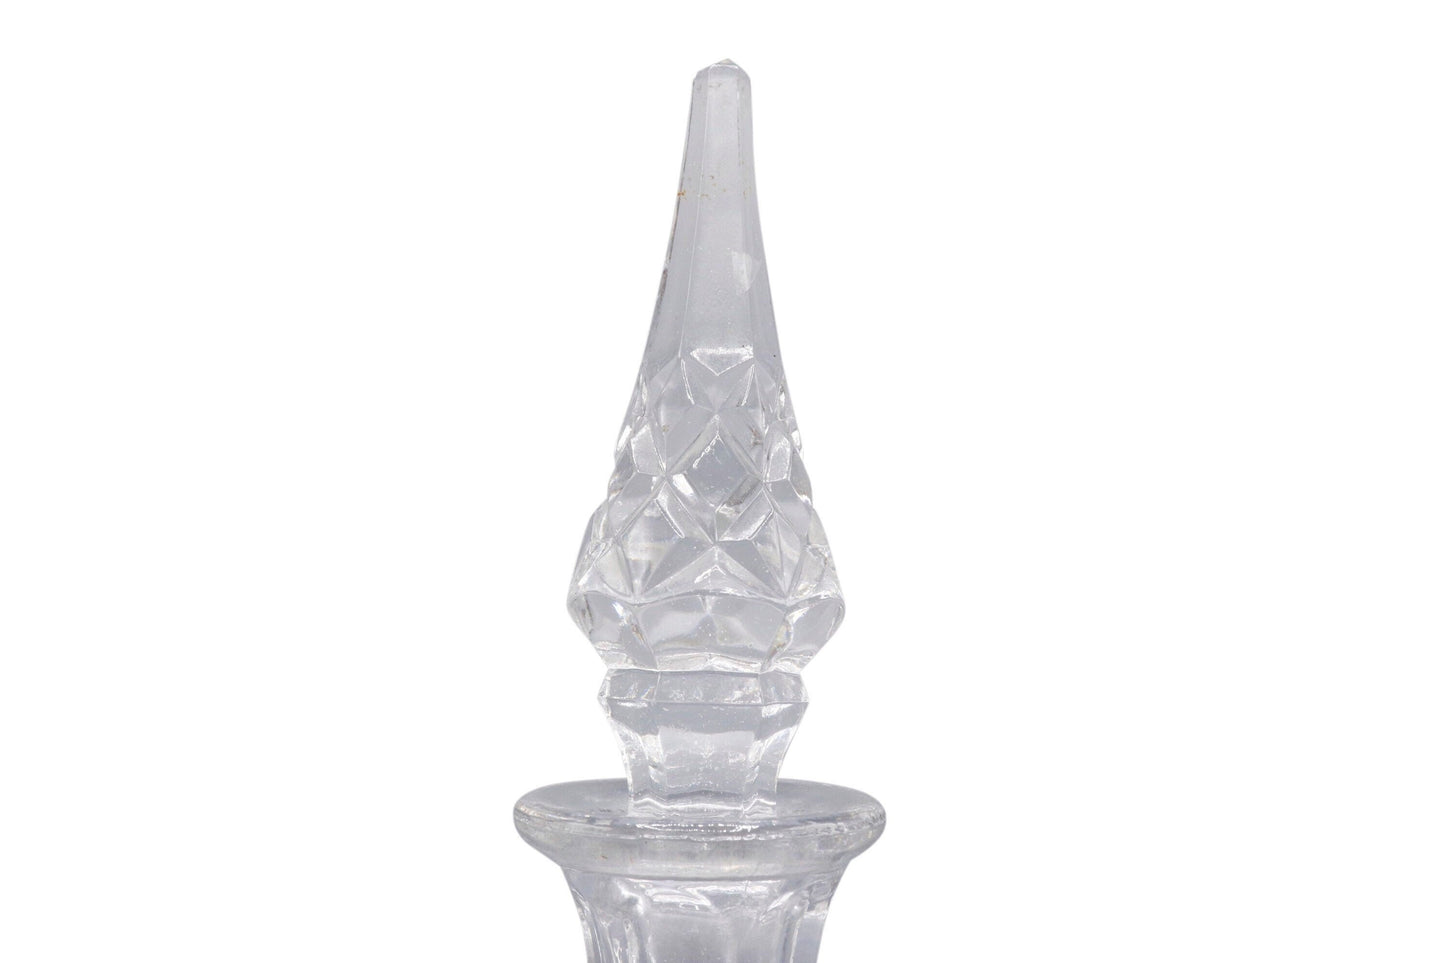 Art deco Crystal handmade decanter with the stopper design by west Germany.